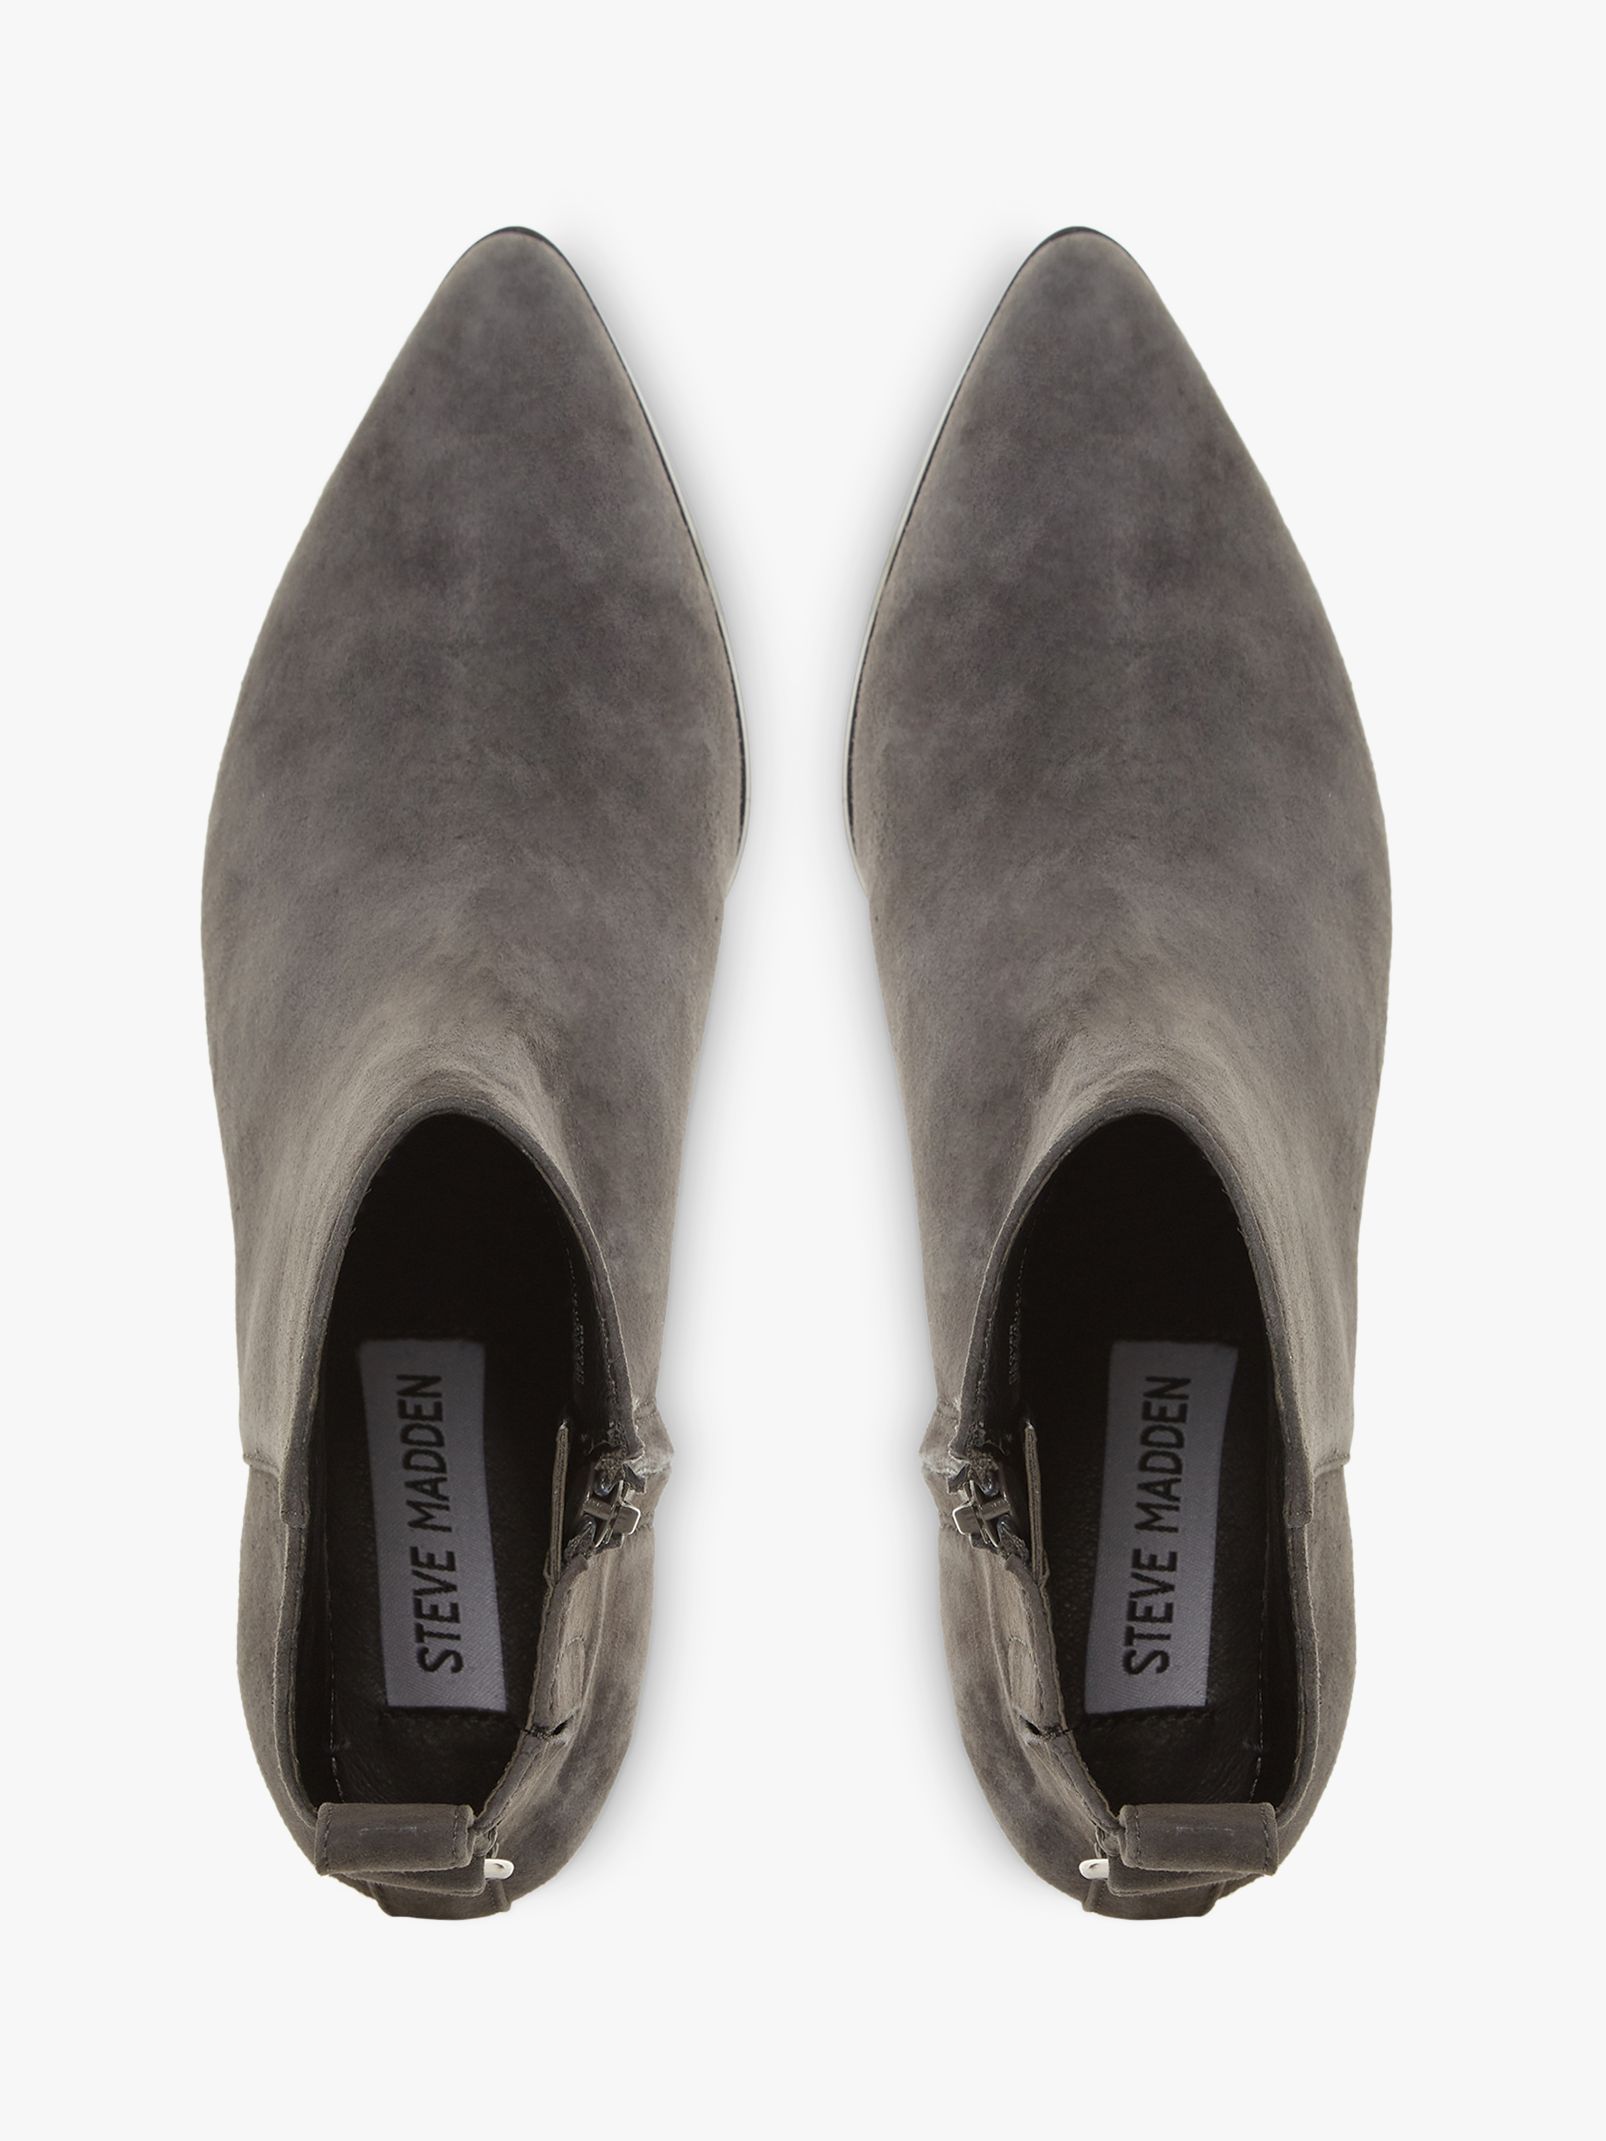 steve madden gray suede boots